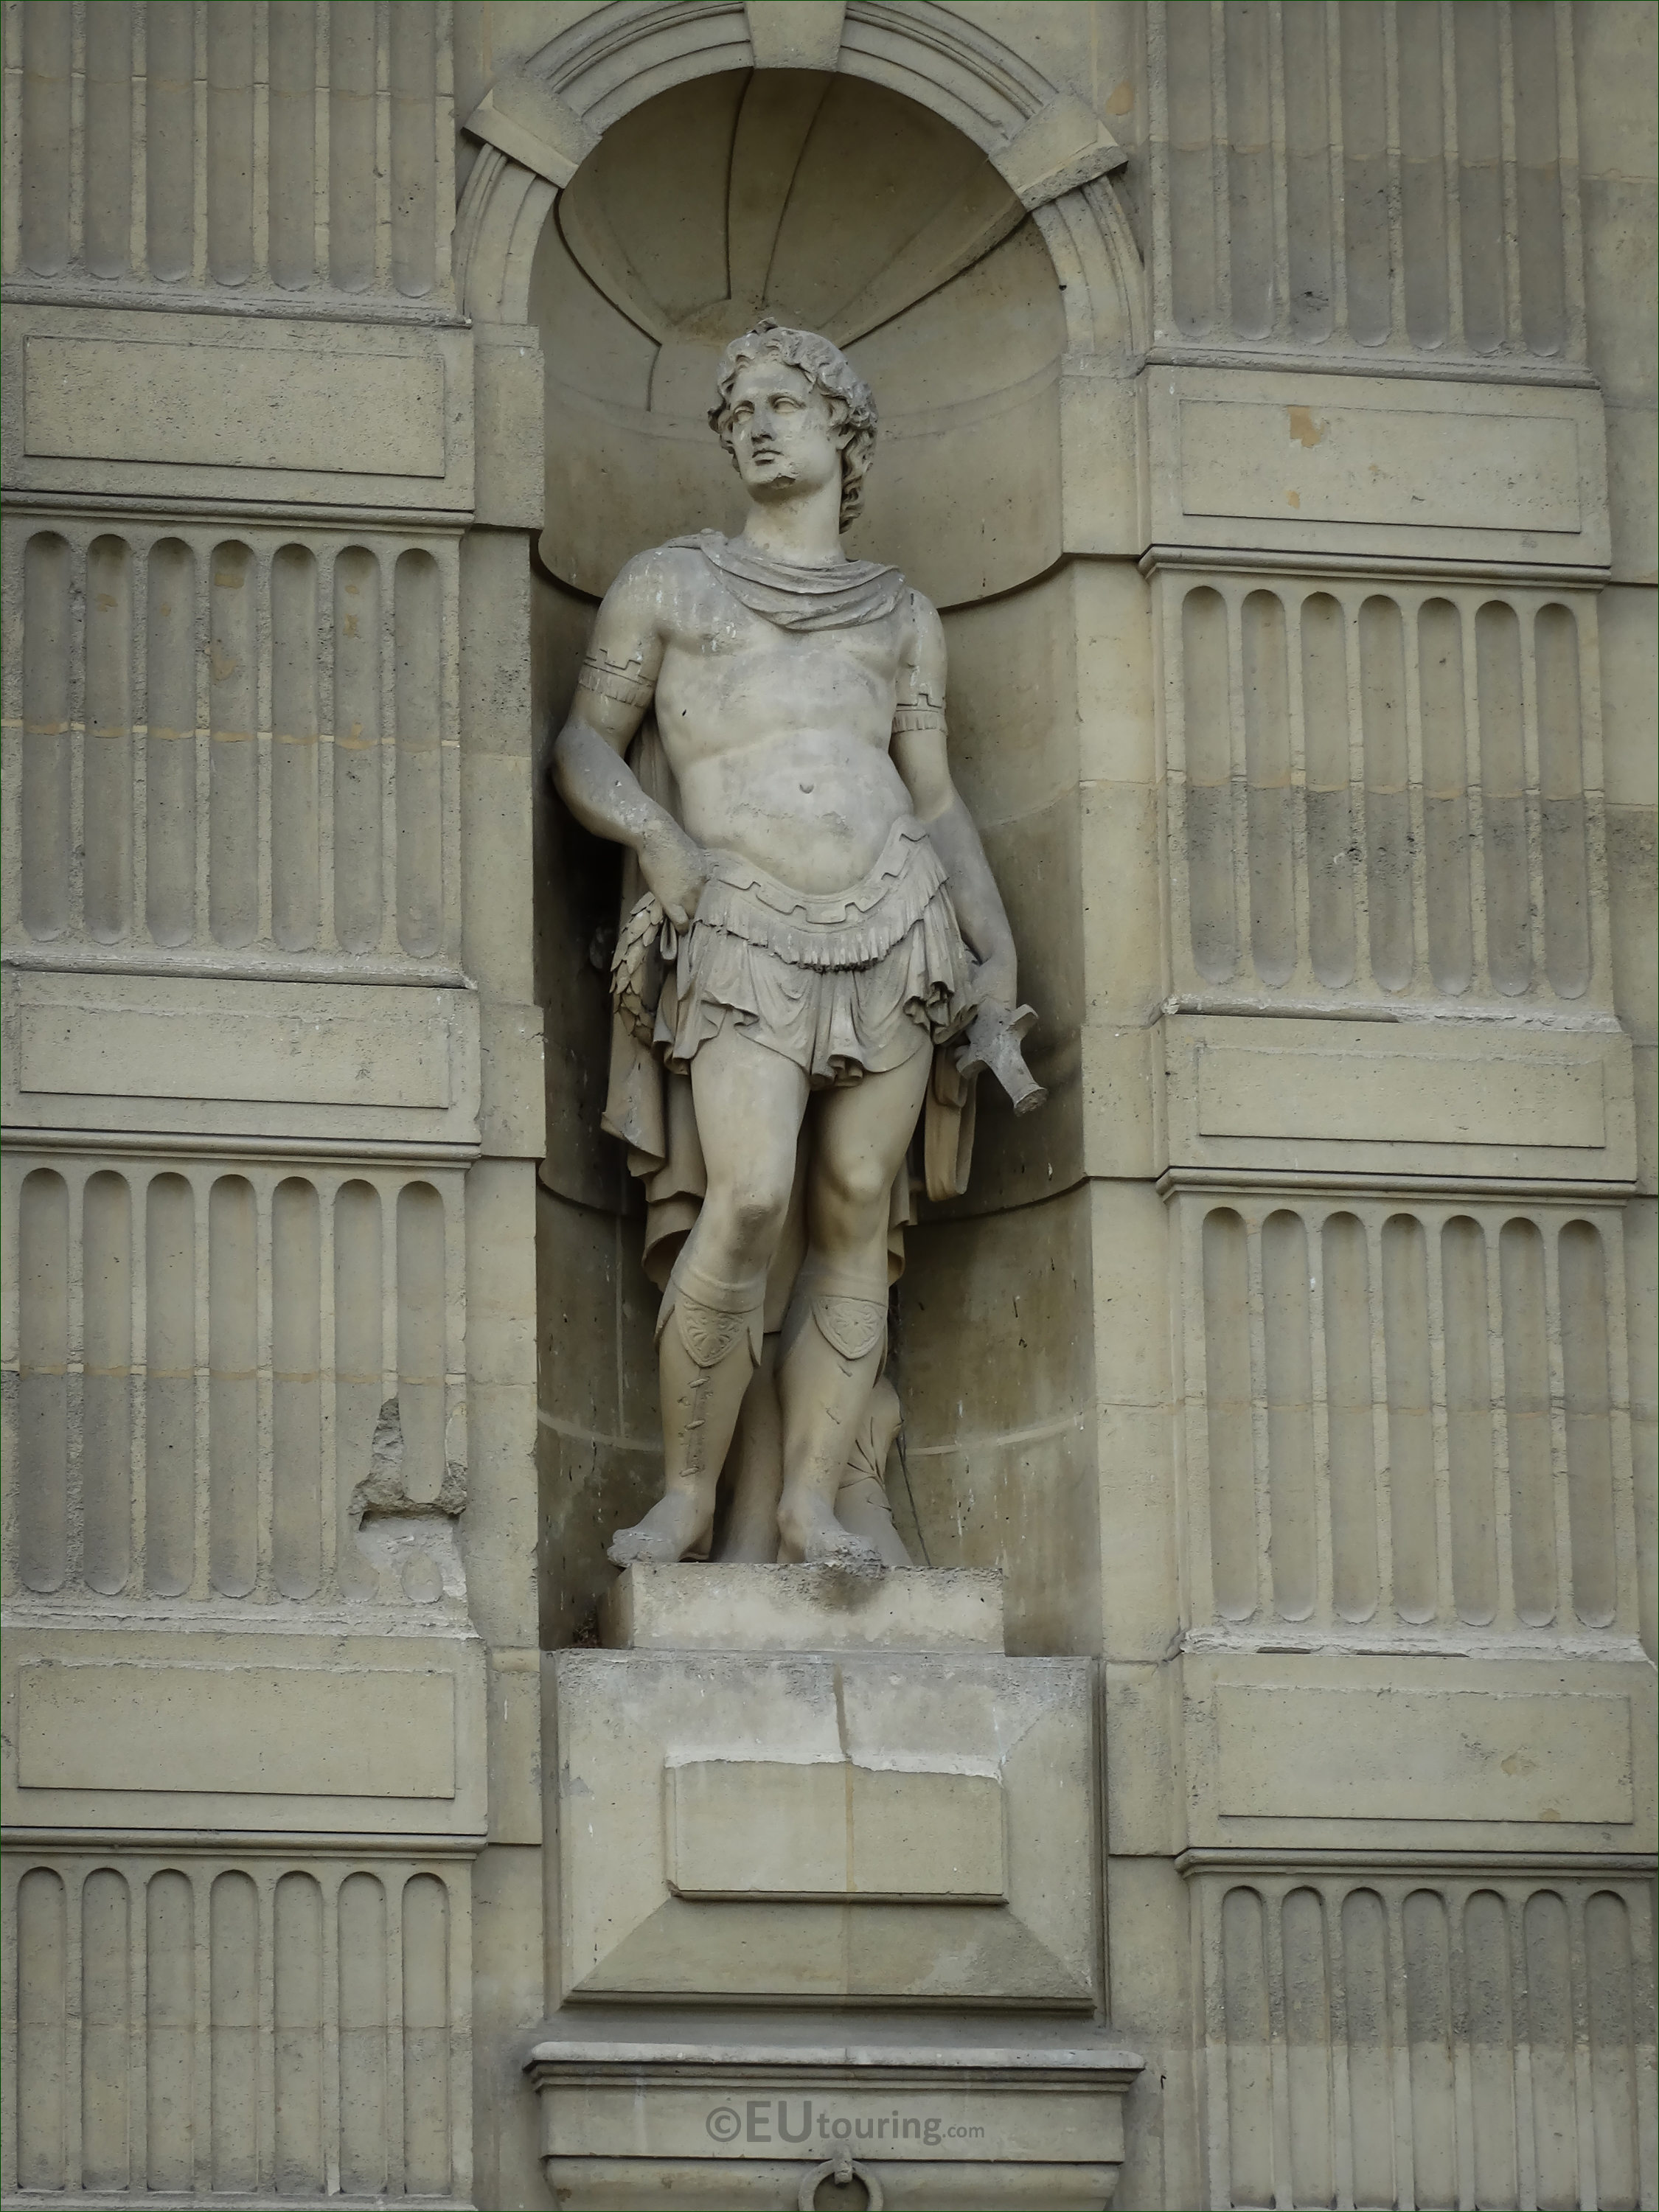 Photos of Pollux statue on Aile de Flore at the Louvre - Page 432